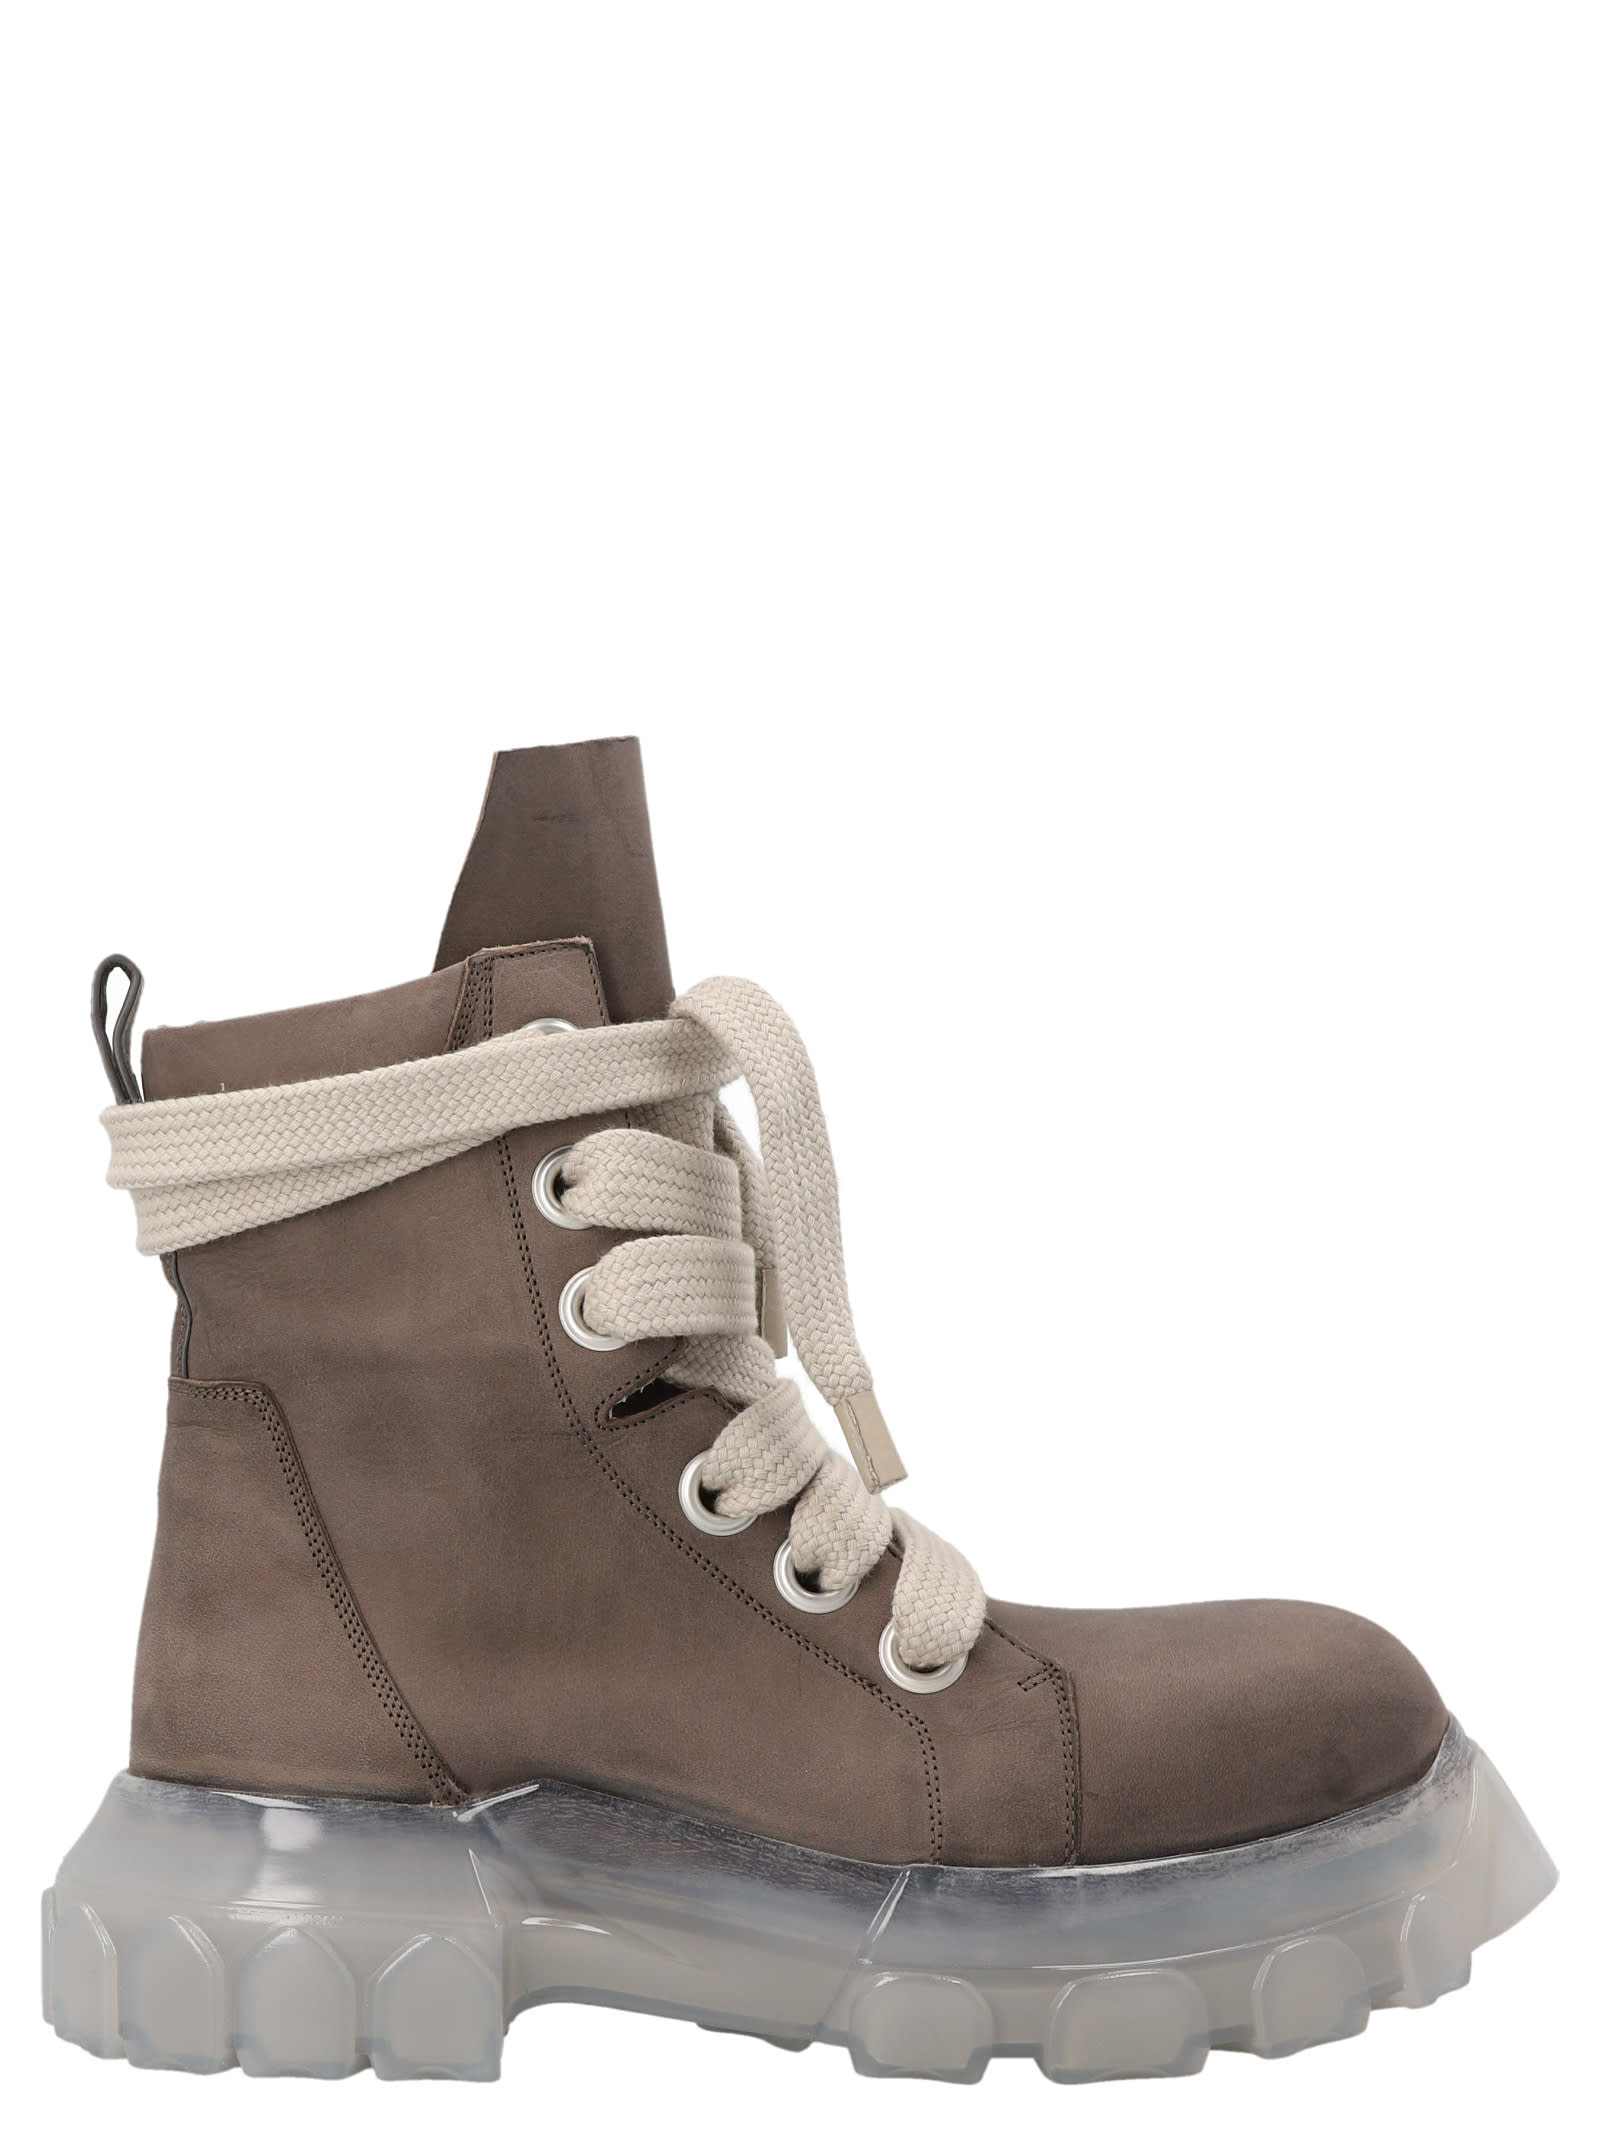 RICK OWENS JUMBOLACED LACEUP BOZO TRACTOR COMBAT BOOTS